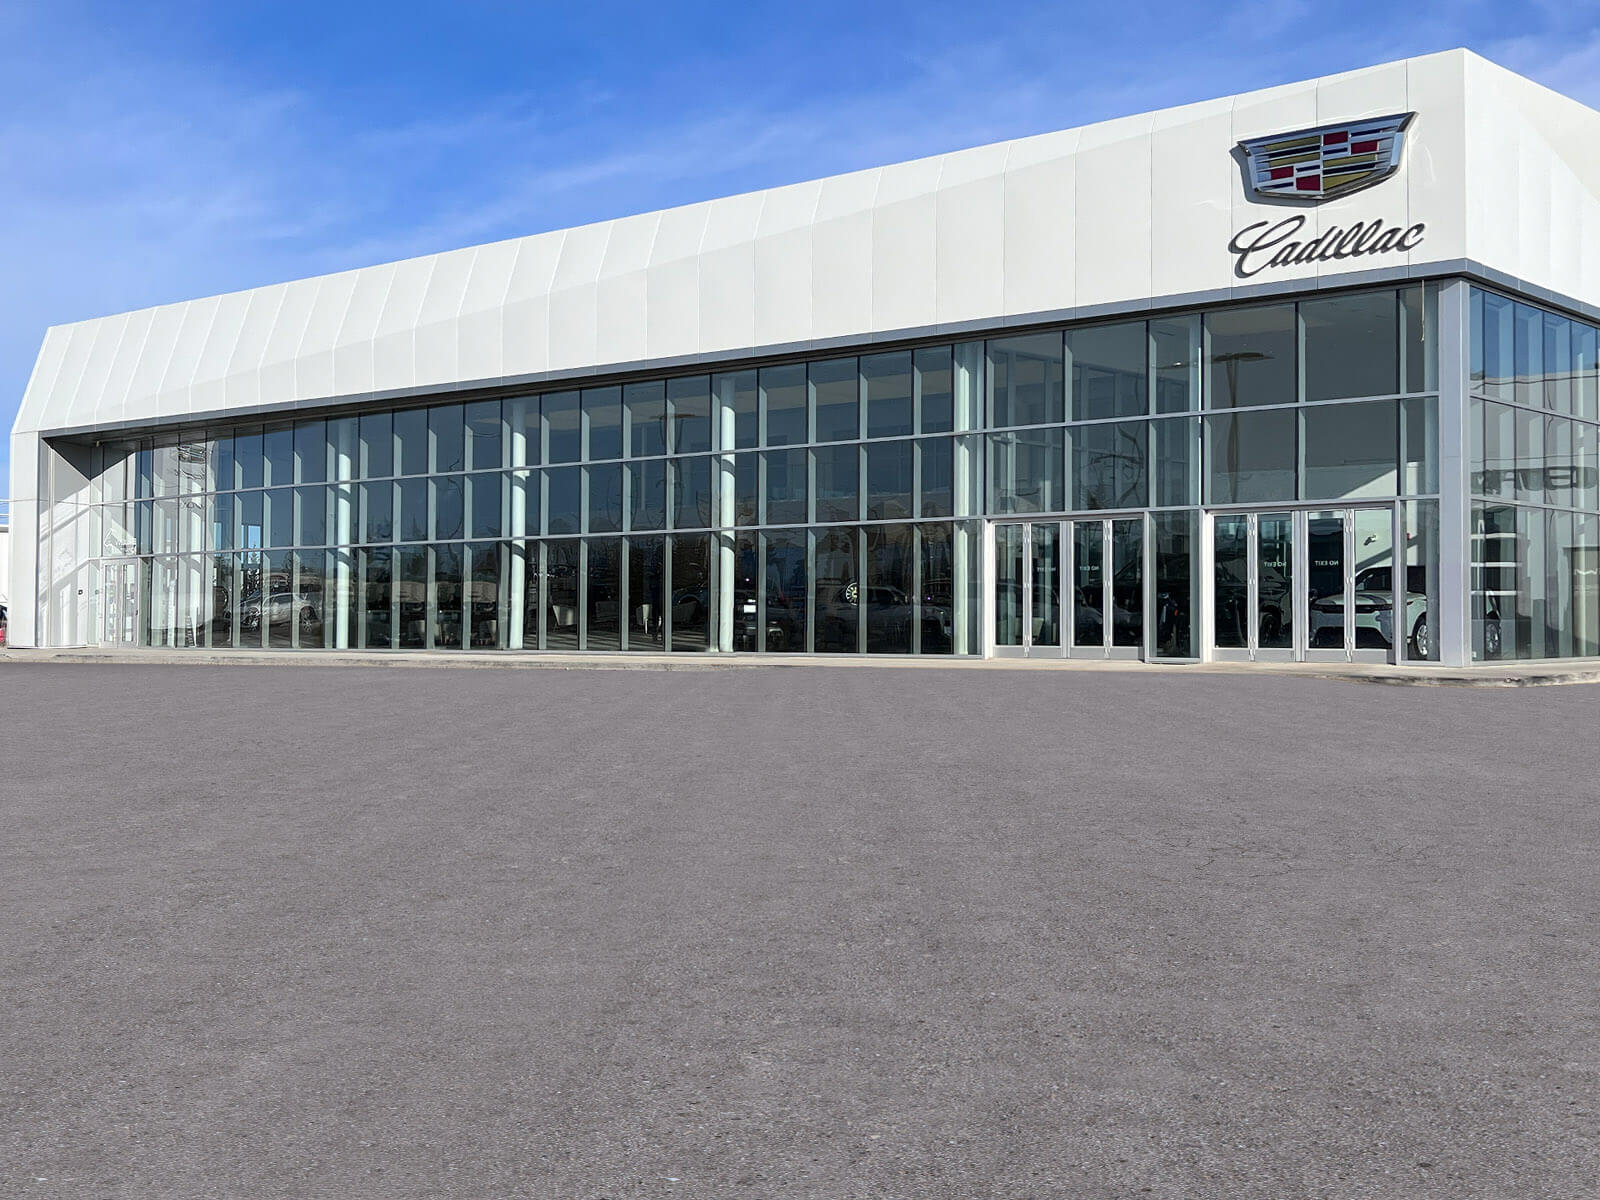 Welcome to <span class="nowrap">Wolfe Cadillac Calgary!</span>